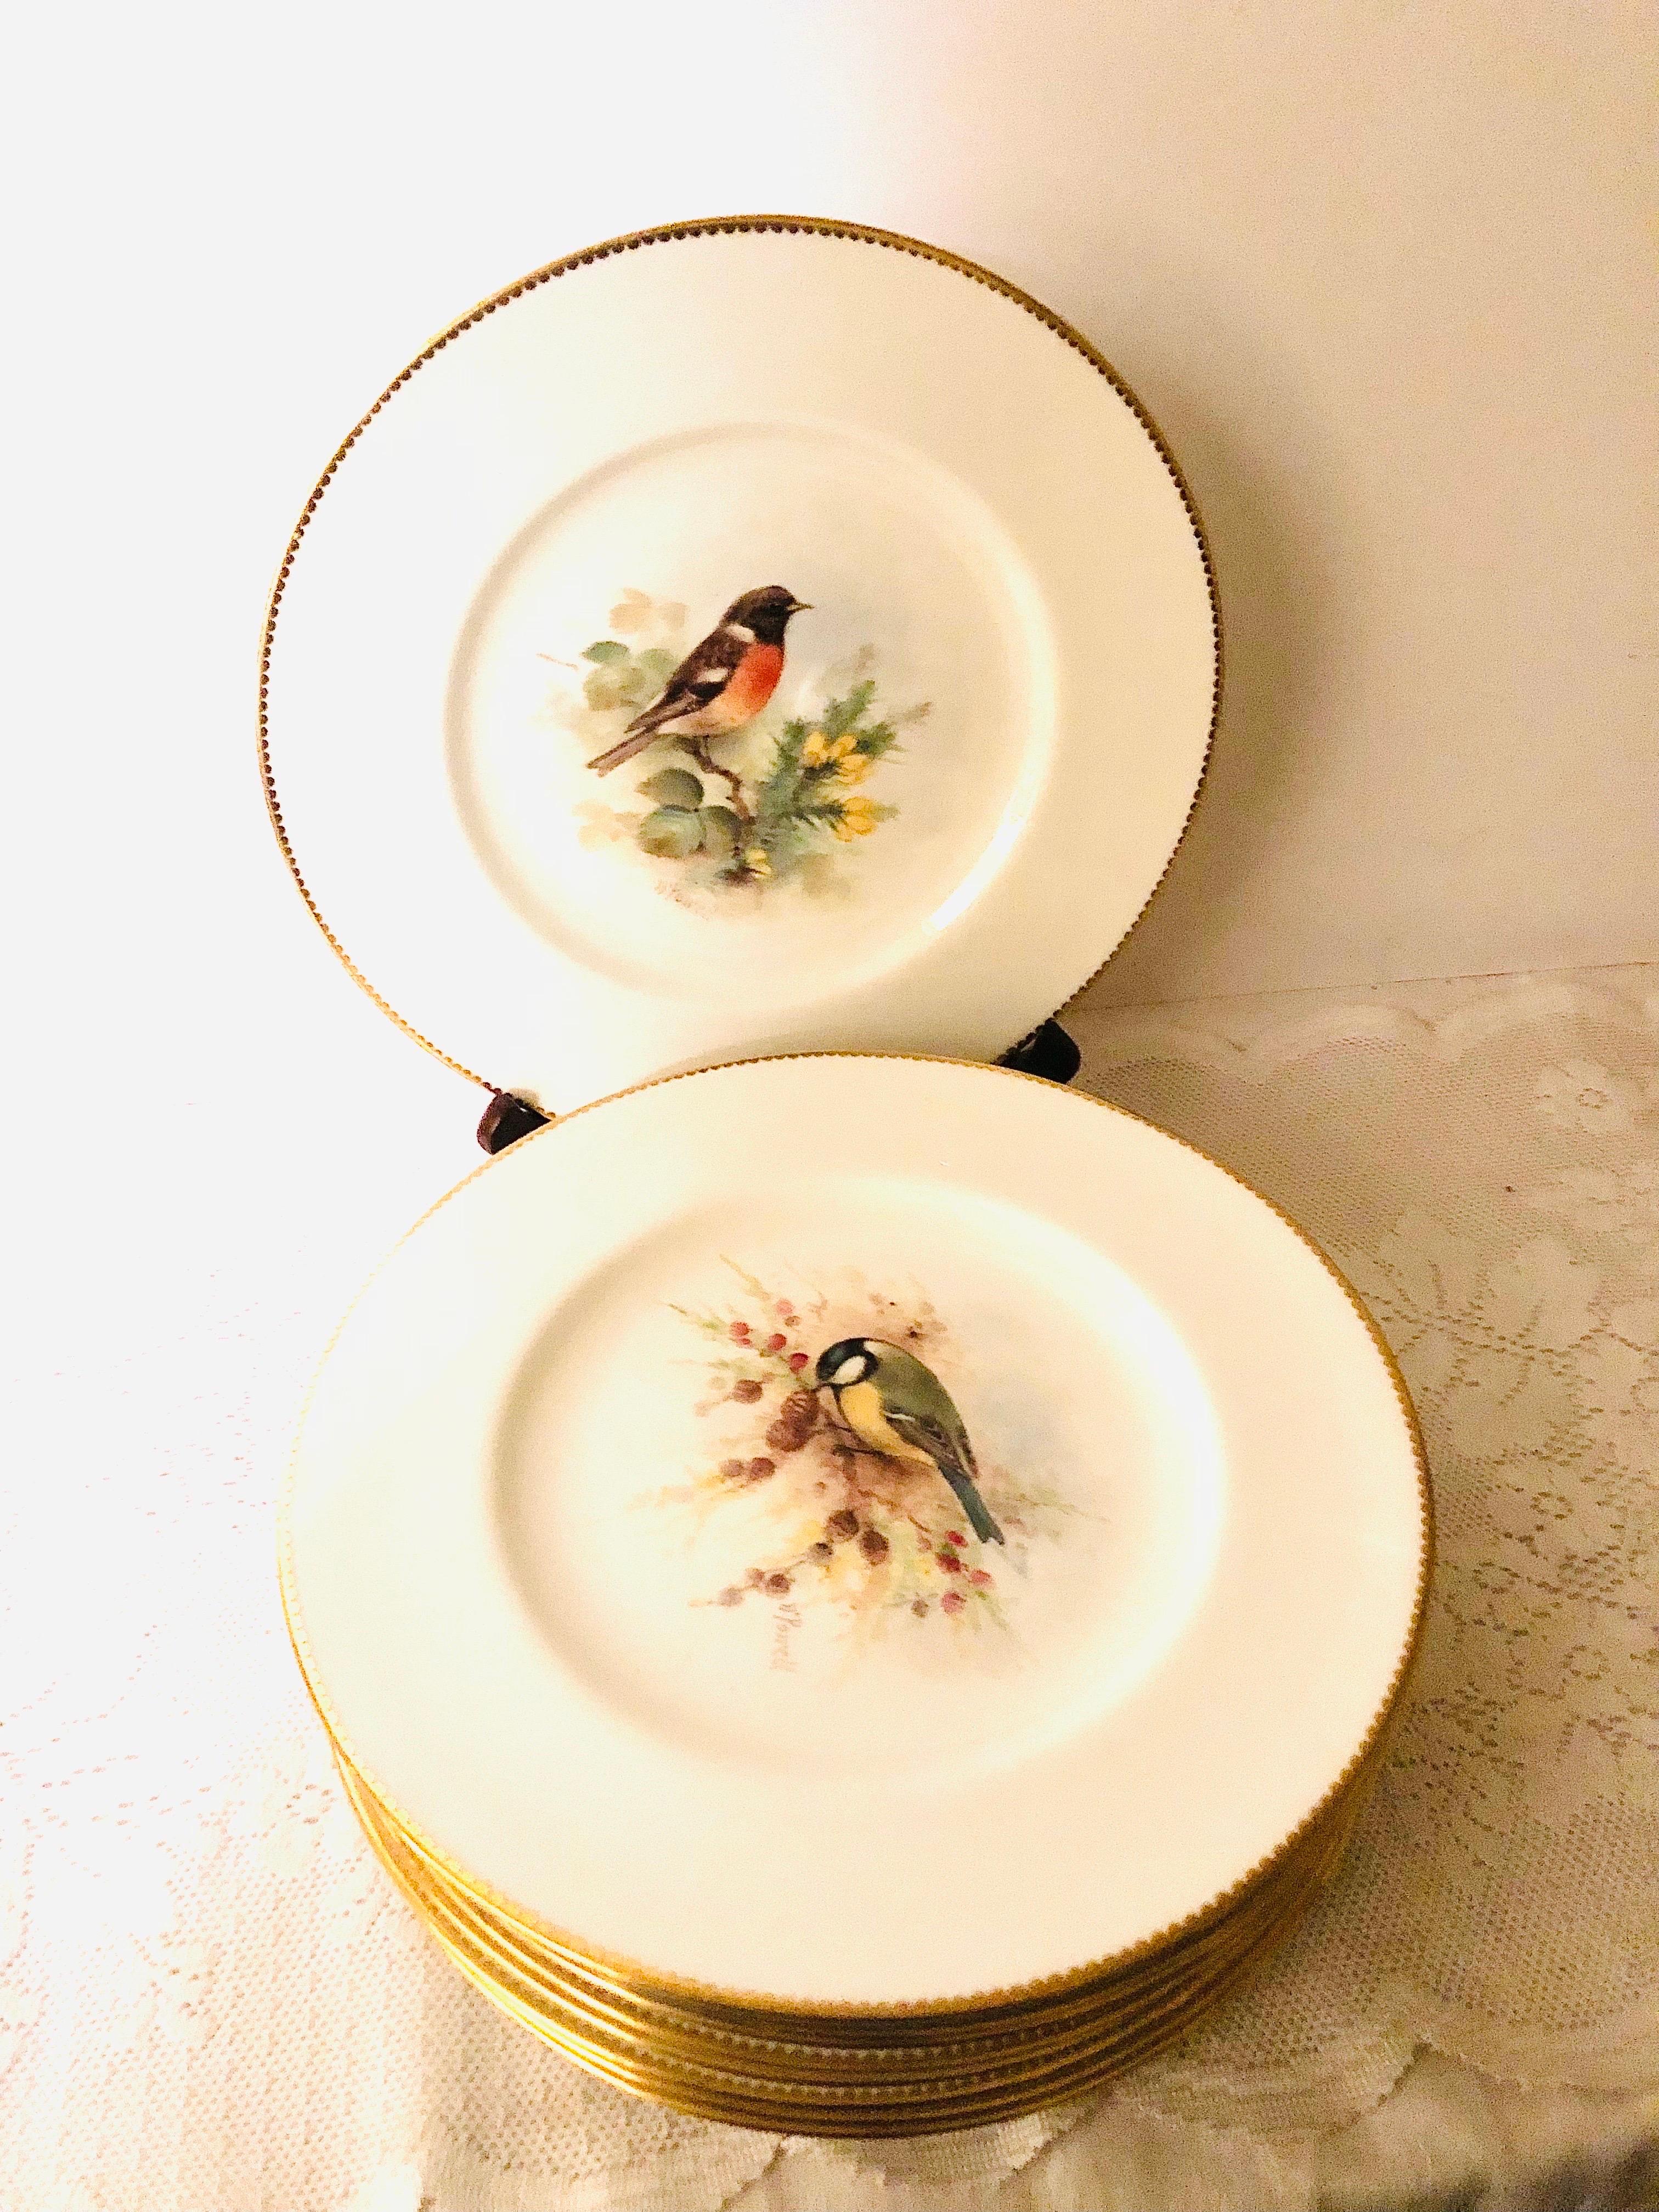 I want to present you with this fabulous set of eleven Royal Worcester dinner plates, each masterfully painted with different bird paintings in their natural habitat. Each plate has the name of the bird painted on the front written on the back of